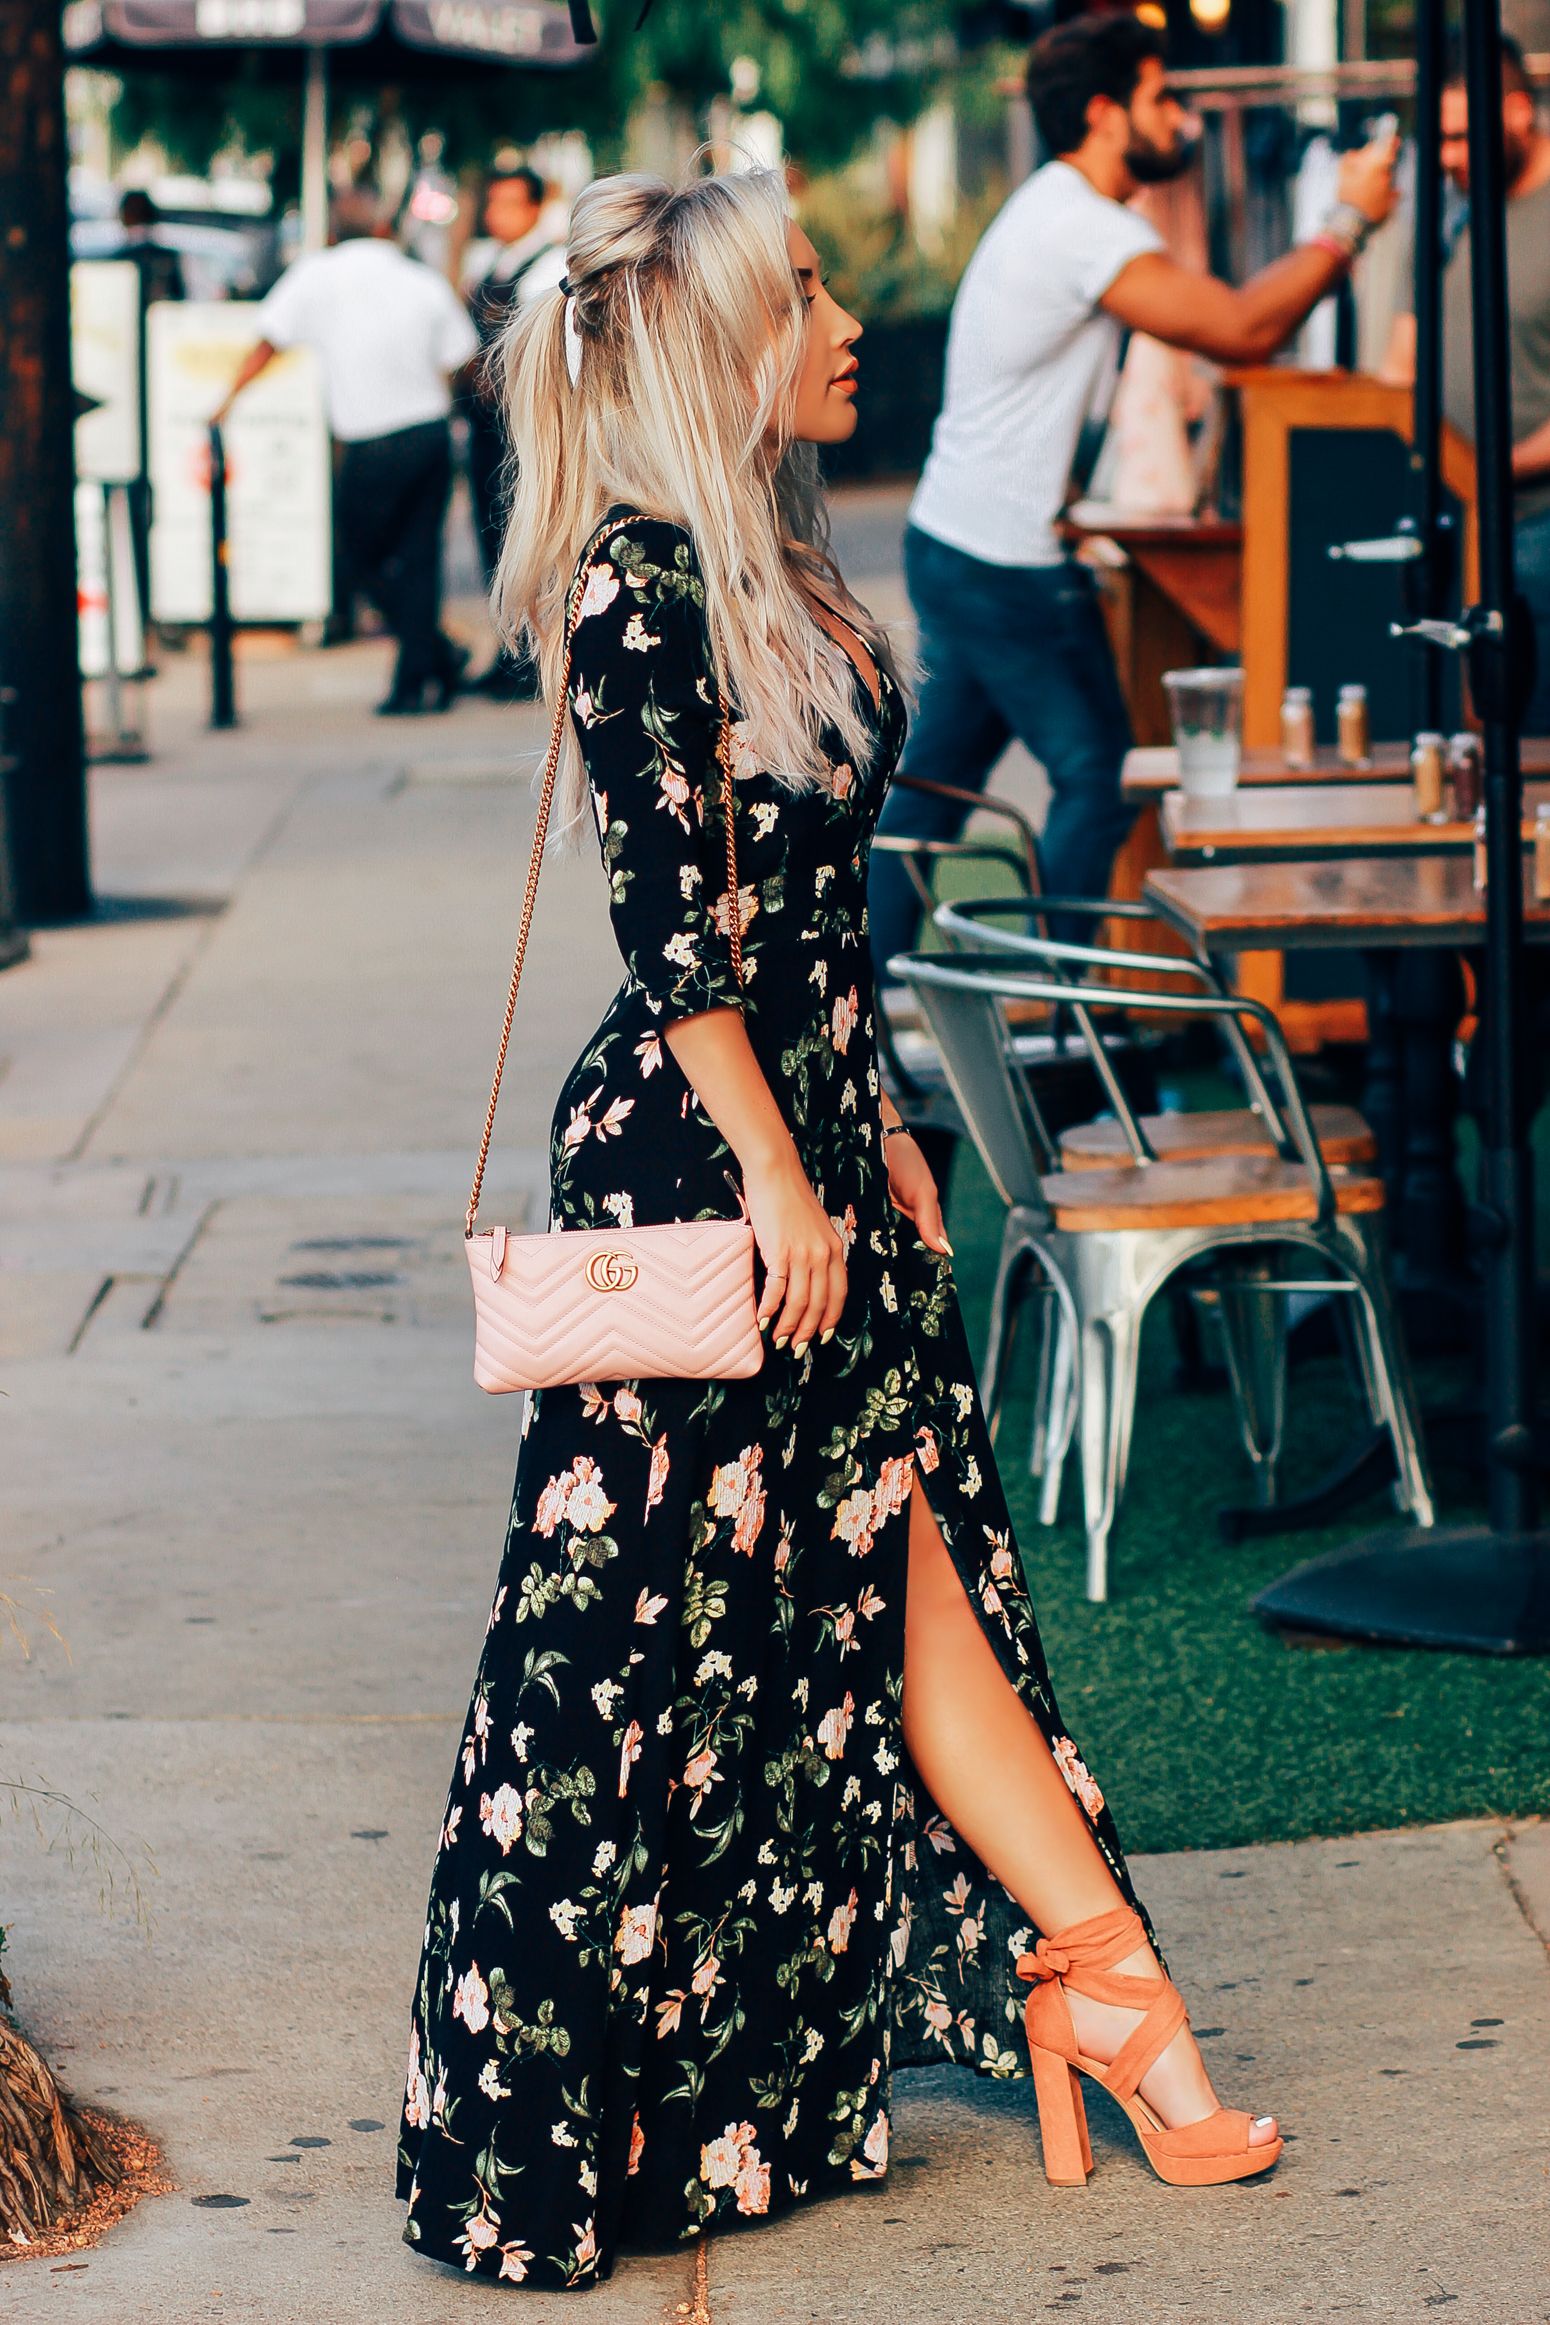 How To Style Black Floral Dress